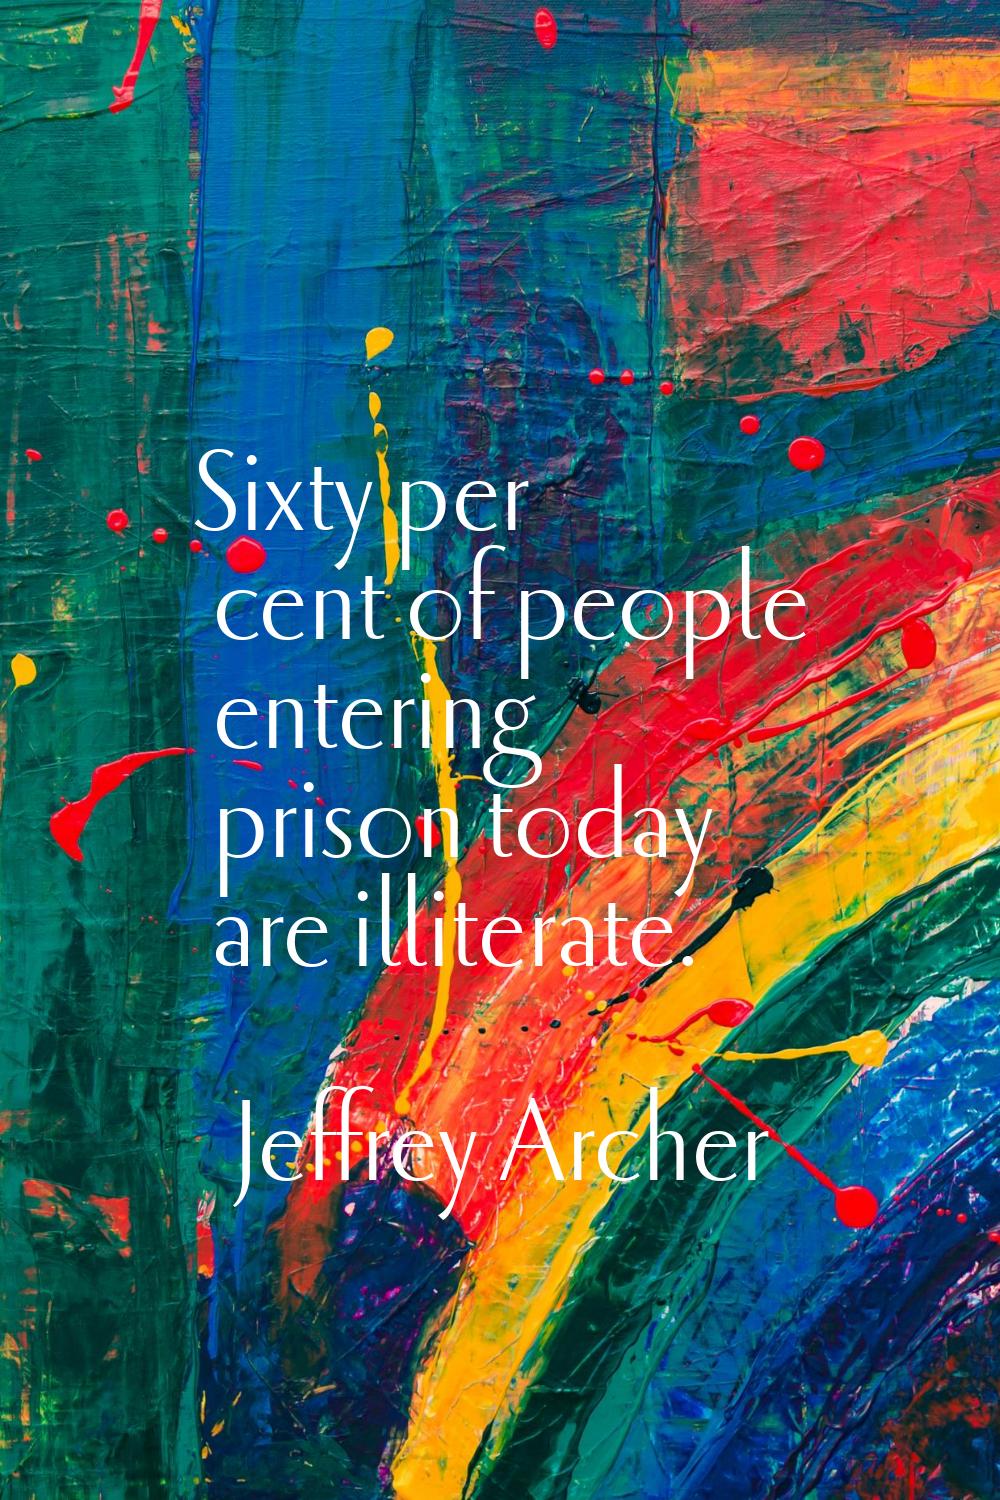 Sixty per cent of people entering prison today are illiterate.